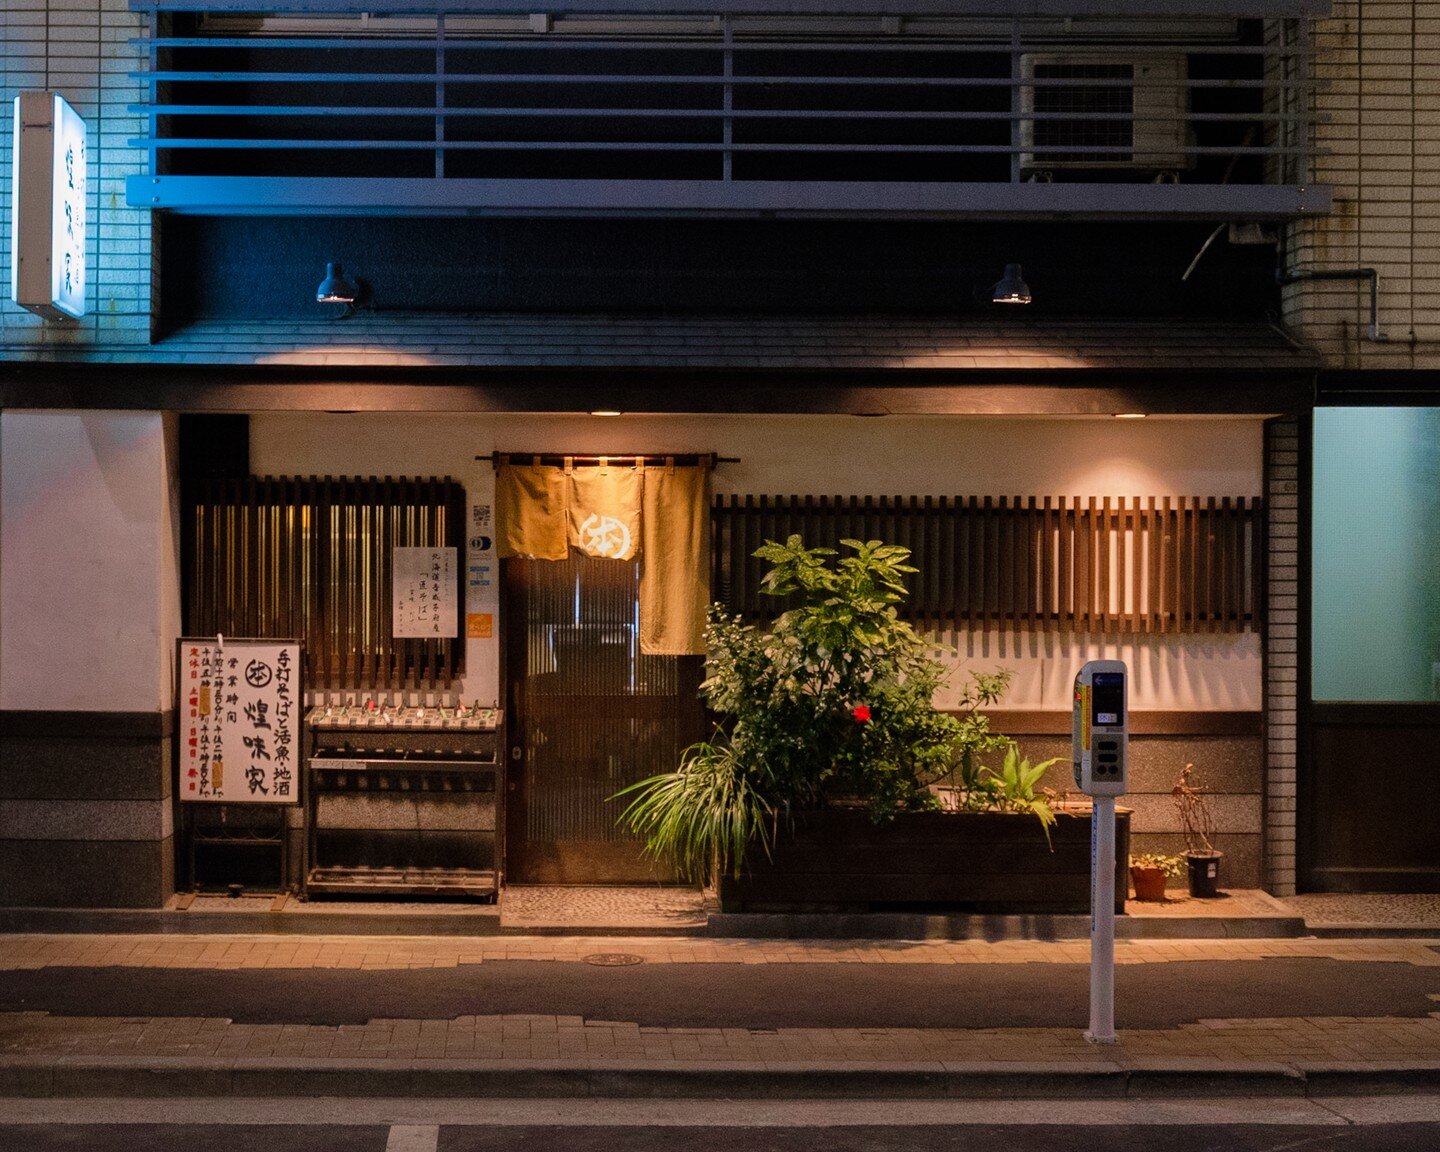 Landing in Tokyo and looking at the light.

At night, it emerges between two bodies of darkness. Neon lights mix with pastels, interiors come alive. Each window becomes an island of resistance, a proof of a parallel life.

We stroll through the stree